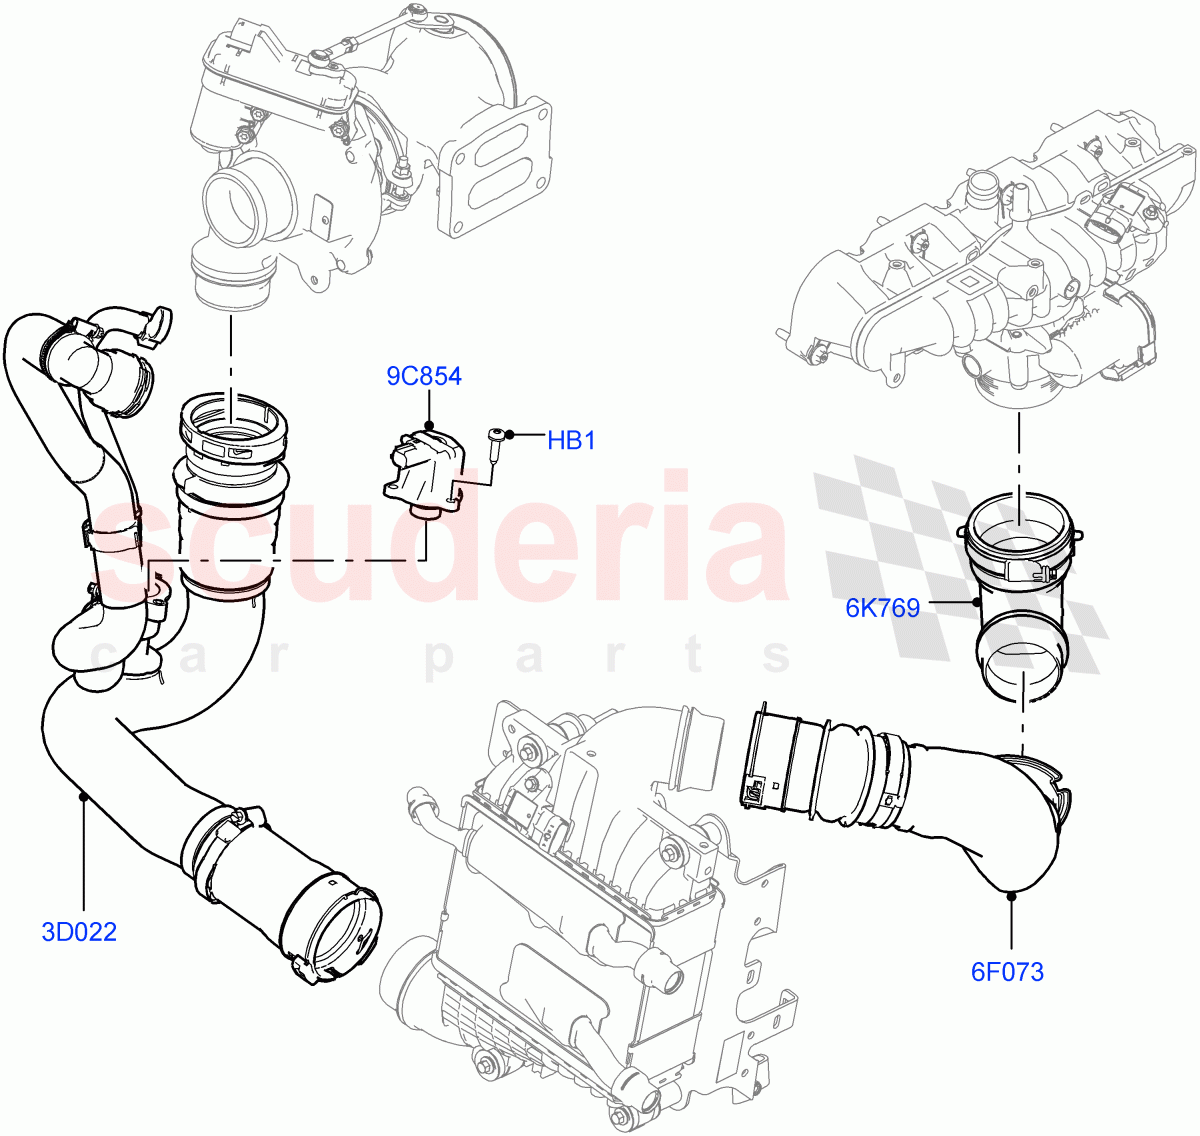 Intercooler/Air Ducts And Hoses(Air Ducts And Hoses)(2.0L I4 Mid DOHC AJ200 Petrol,2.0L I4 High DOHC AJ200 Petrol)((V)FROMLA000001) of Land Rover Land Rover Range Rover Velar (2017+) [2.0 Turbo Petrol AJ200P]